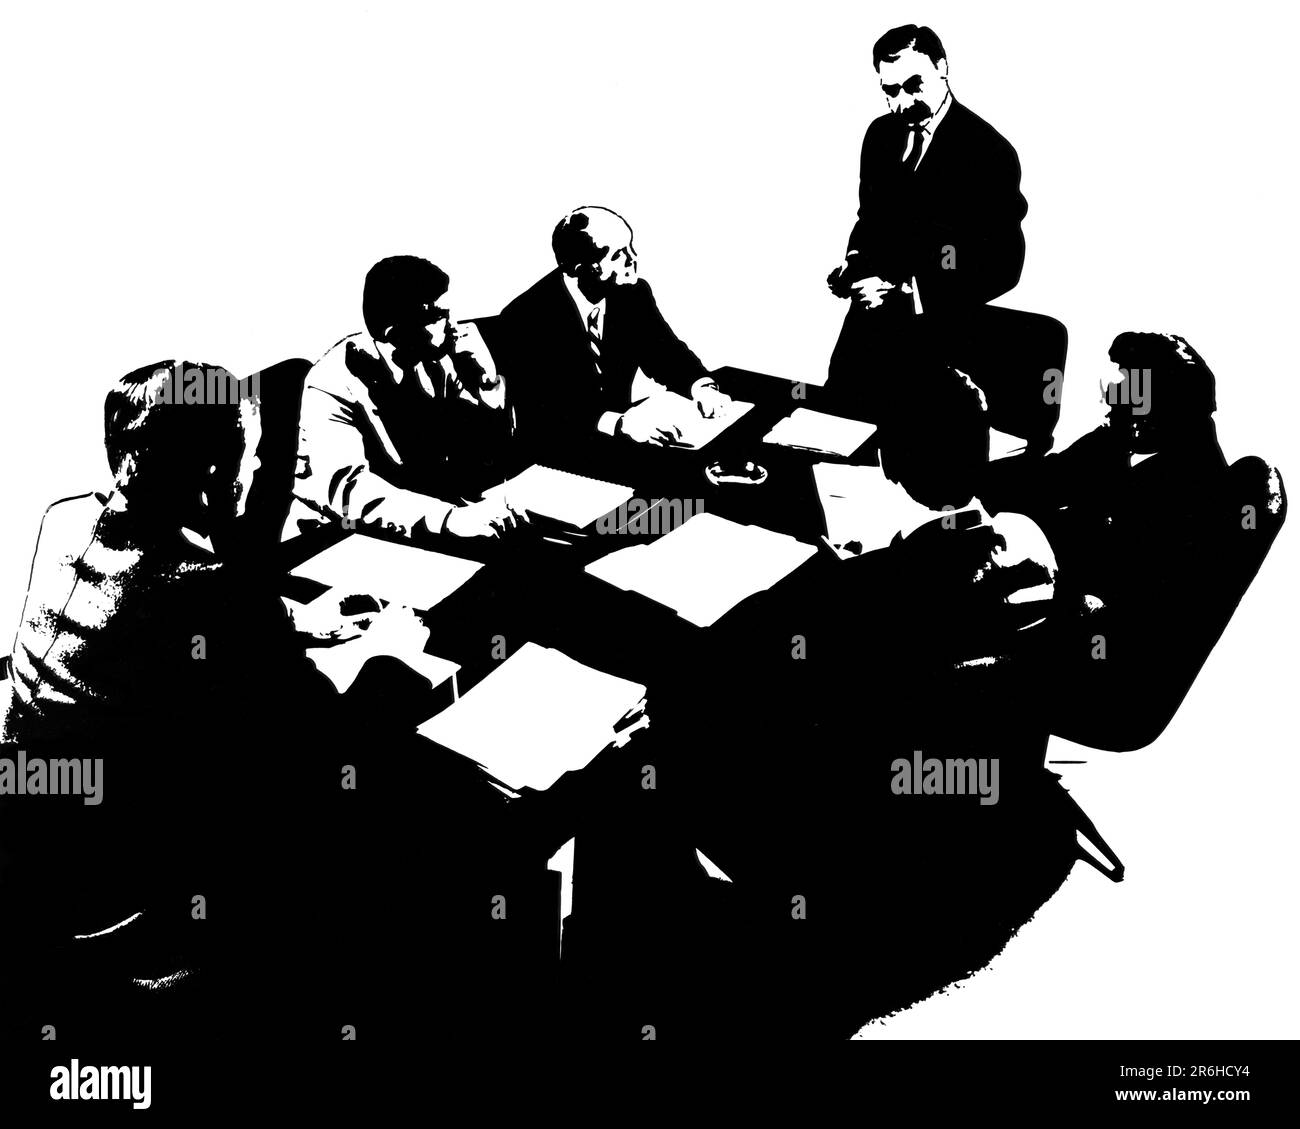 1960s SILHOUETTE OF 6 EXECUTIVE BUSINESSMEN AROUND CONFERENCE TABLE BOARD MEETING - o3229 HAR001 HARS PERSONS GROWN-UP MALES SIX CORPORATE PROFESSION SILHOUETTES EXECUTIVES MIDDLE-AGED B&W MEET OUTLINE MIDDLE-AGED MAN WORK PLACE GOALS WHITE COLLAR OCCUPATION HIGH ANGLE SILHOUETTED NETWORKING CAREERS LEADERSHIP AUTHORITY OCCUPATIONS BOSSES STYLISH NO WOMEN ALL MEN DECISIONS MANAGERS MID-ADULT MID-ADULT MAN TOGETHERNESS BLACK AND WHITE CAUCASIAN ETHNICITY HAR001 OLD FASHIONED POSTERIZED Stock Photo